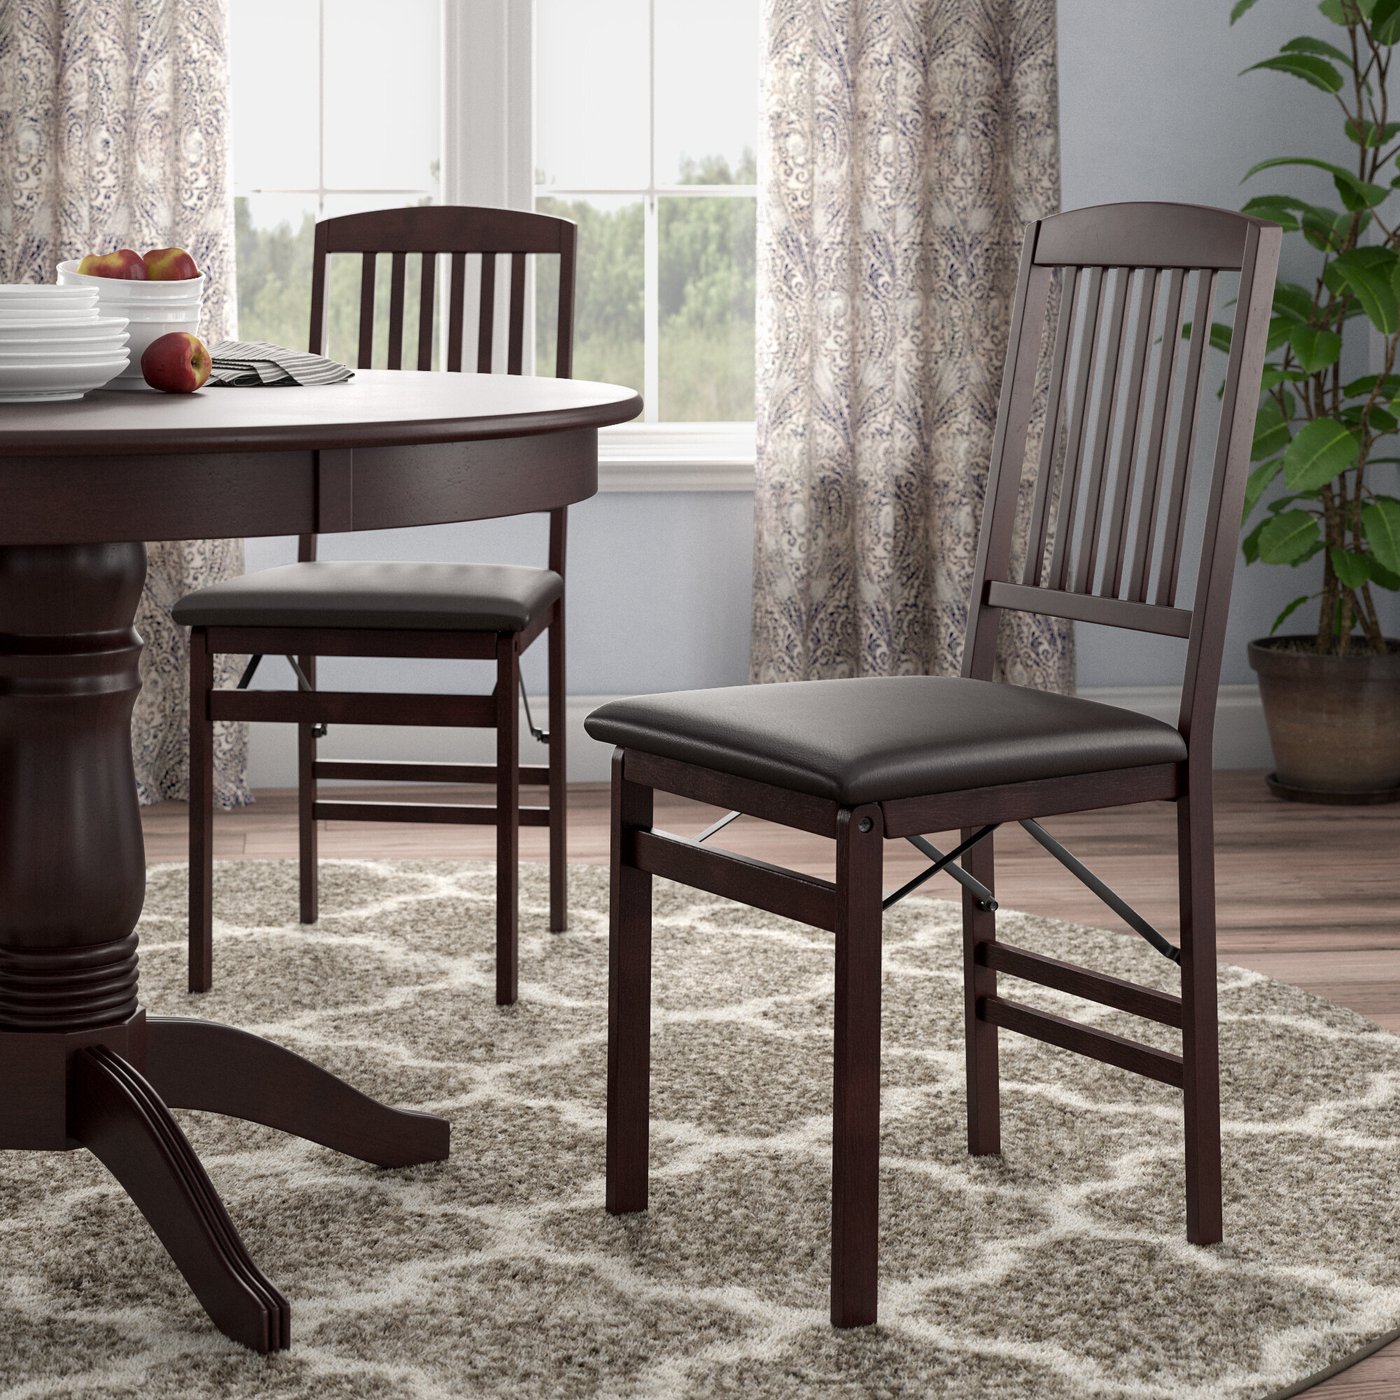 6 Folding Dining Chair Styles For Apartments: Just In Time For Holiday